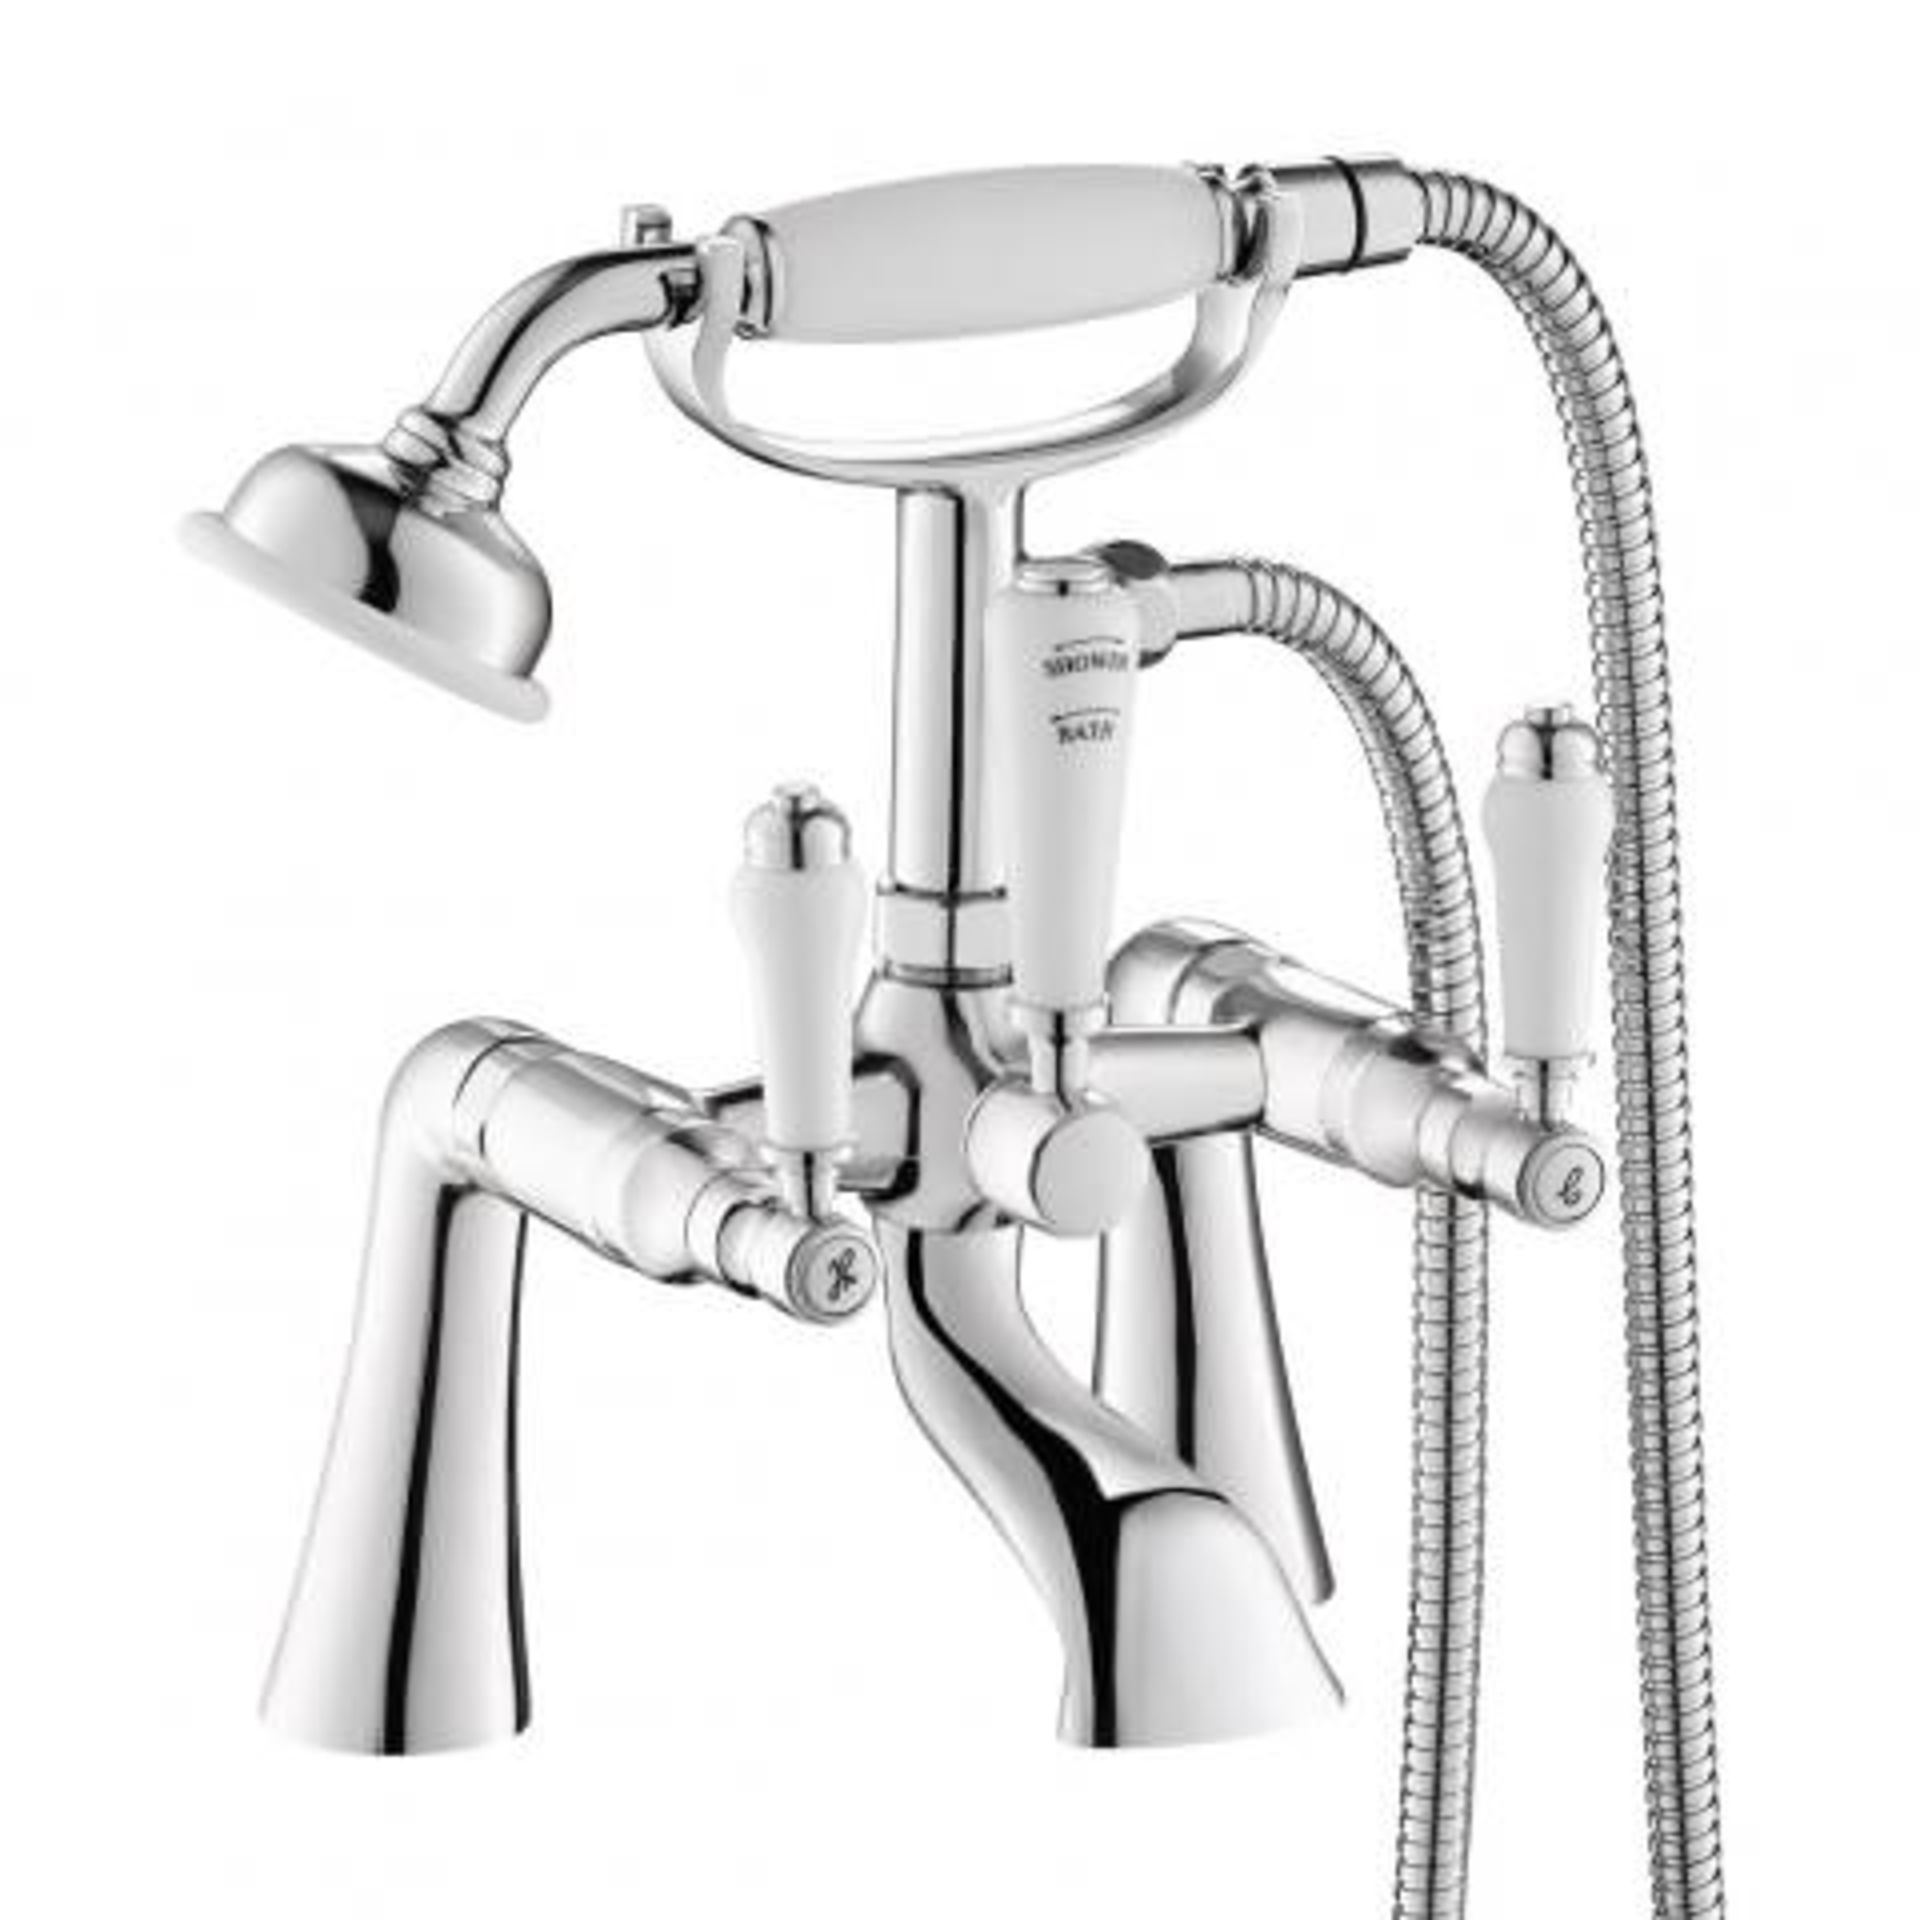 (I61) Regal Chrome Traditional Bath Mixer Lever Tap with Hand Held Shower RRP £199.99 Vintage - Image 3 of 3